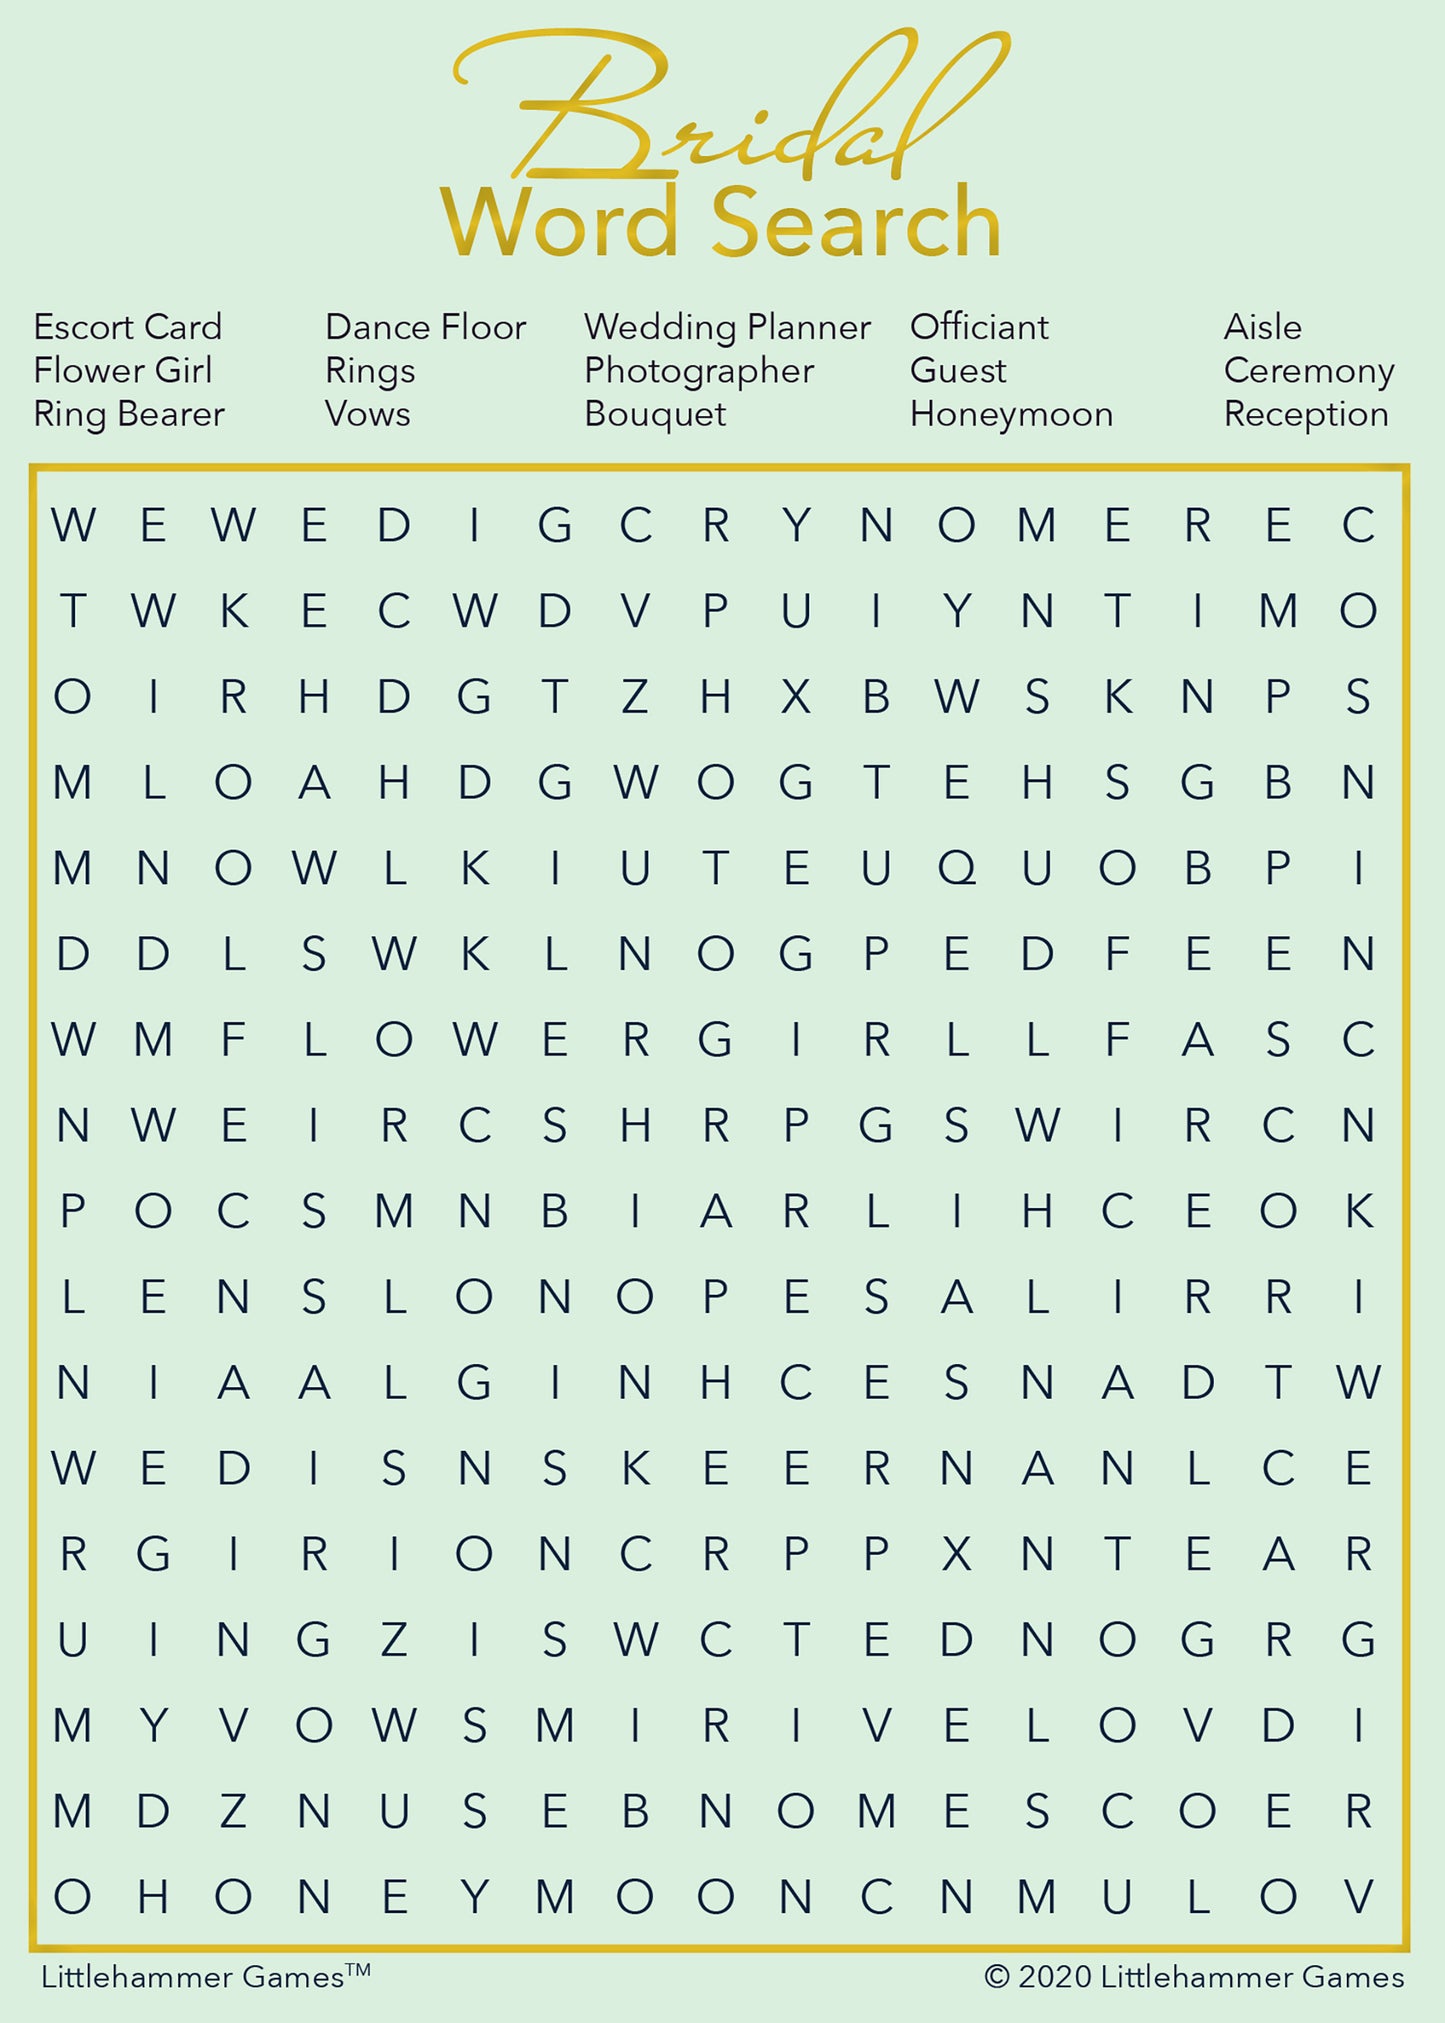 Bridal Word Search game card with a mint and gold background